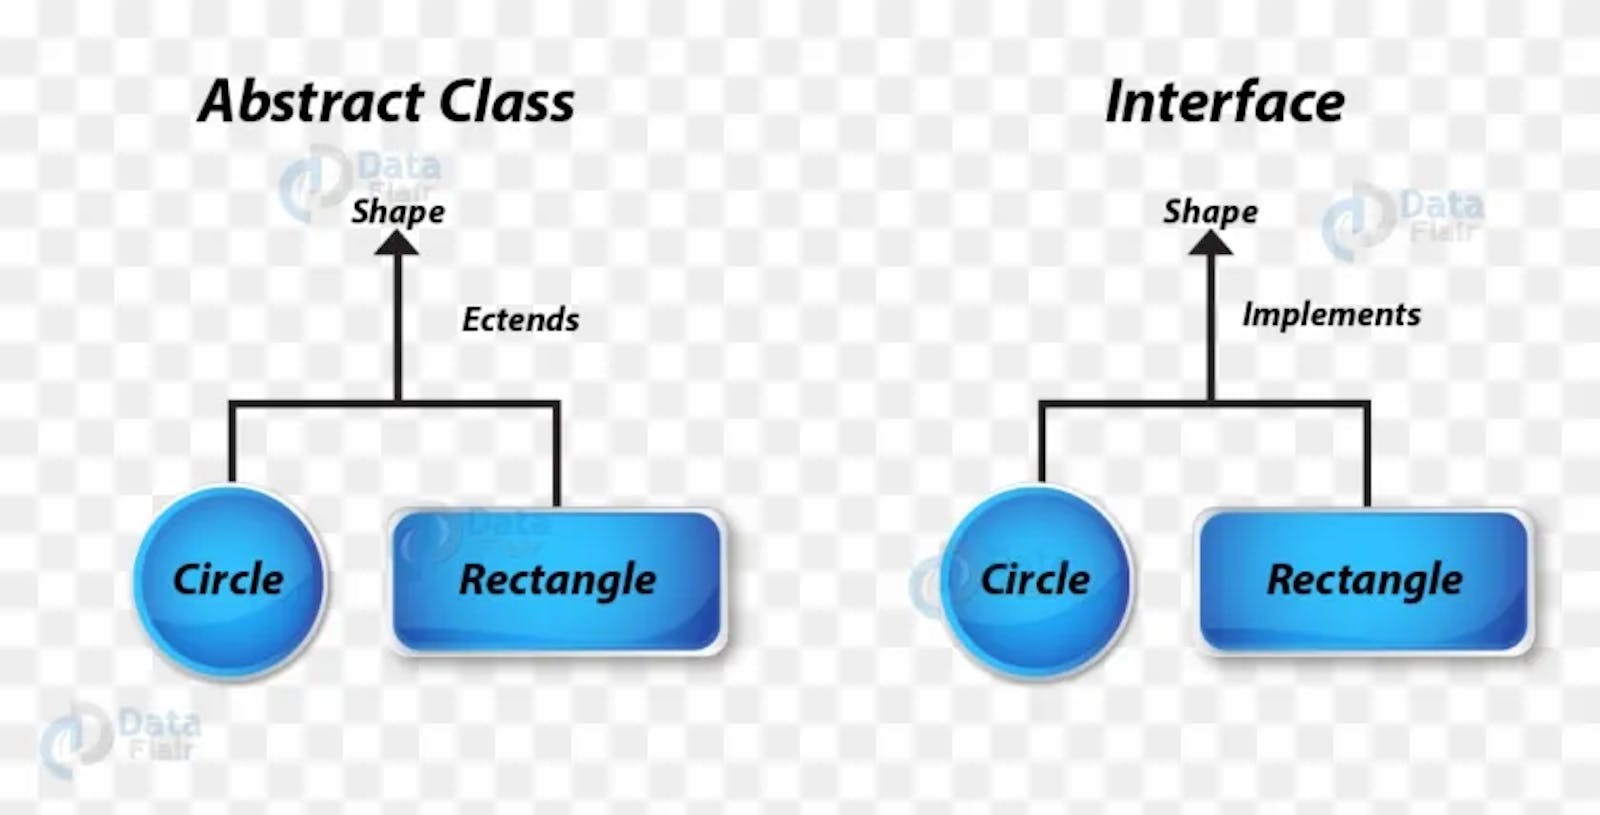 Abstract Classes vs Interfaces